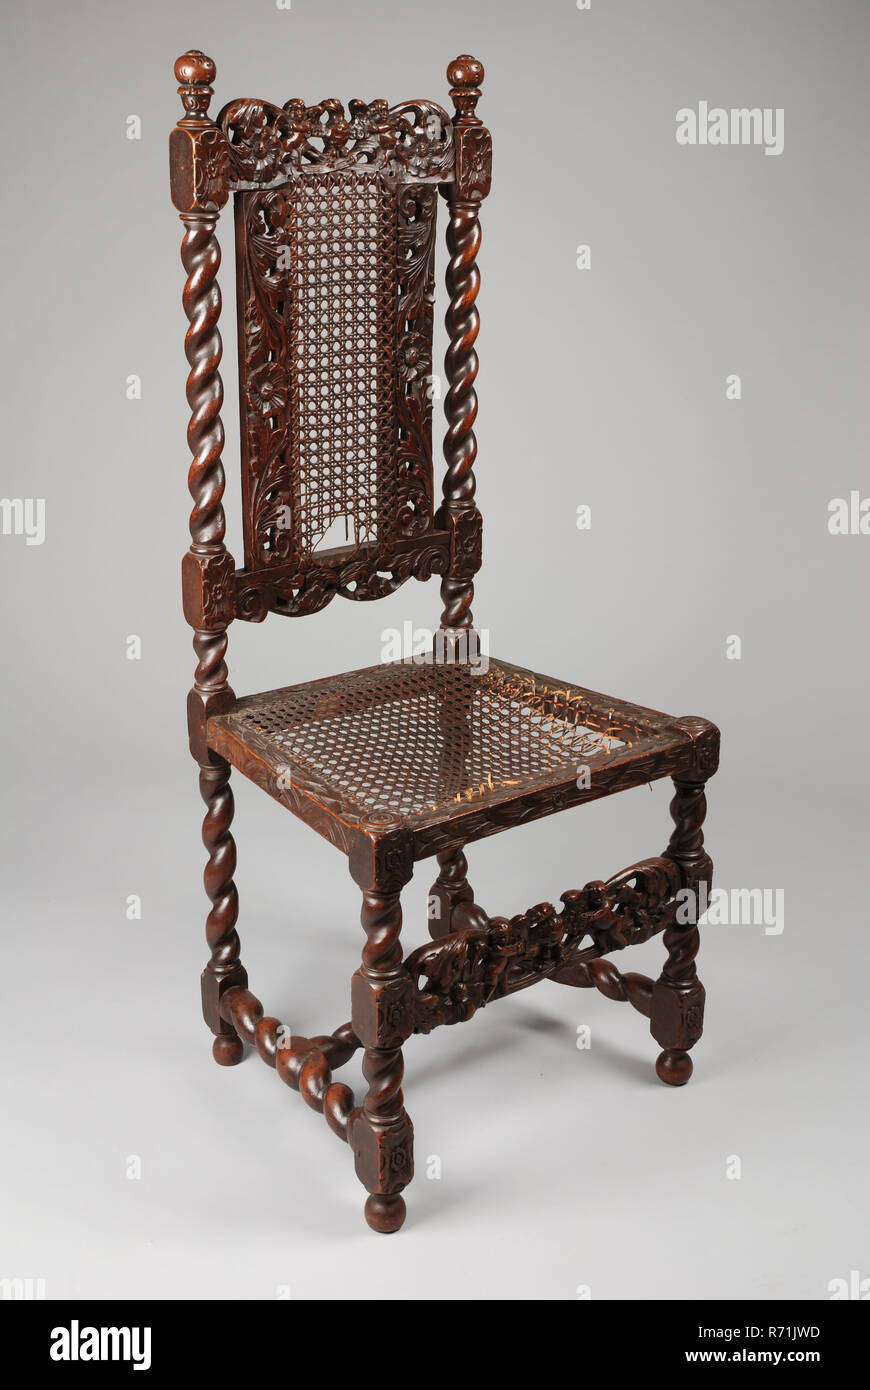 Groenteboer Bot Bridge pier Walnut carved baroque chair, chair furniture interior design wood walnut  rattan, braided seat and back torped legs rules and cover with carving of  putti with eagle baroque Stock Photo - Alamy